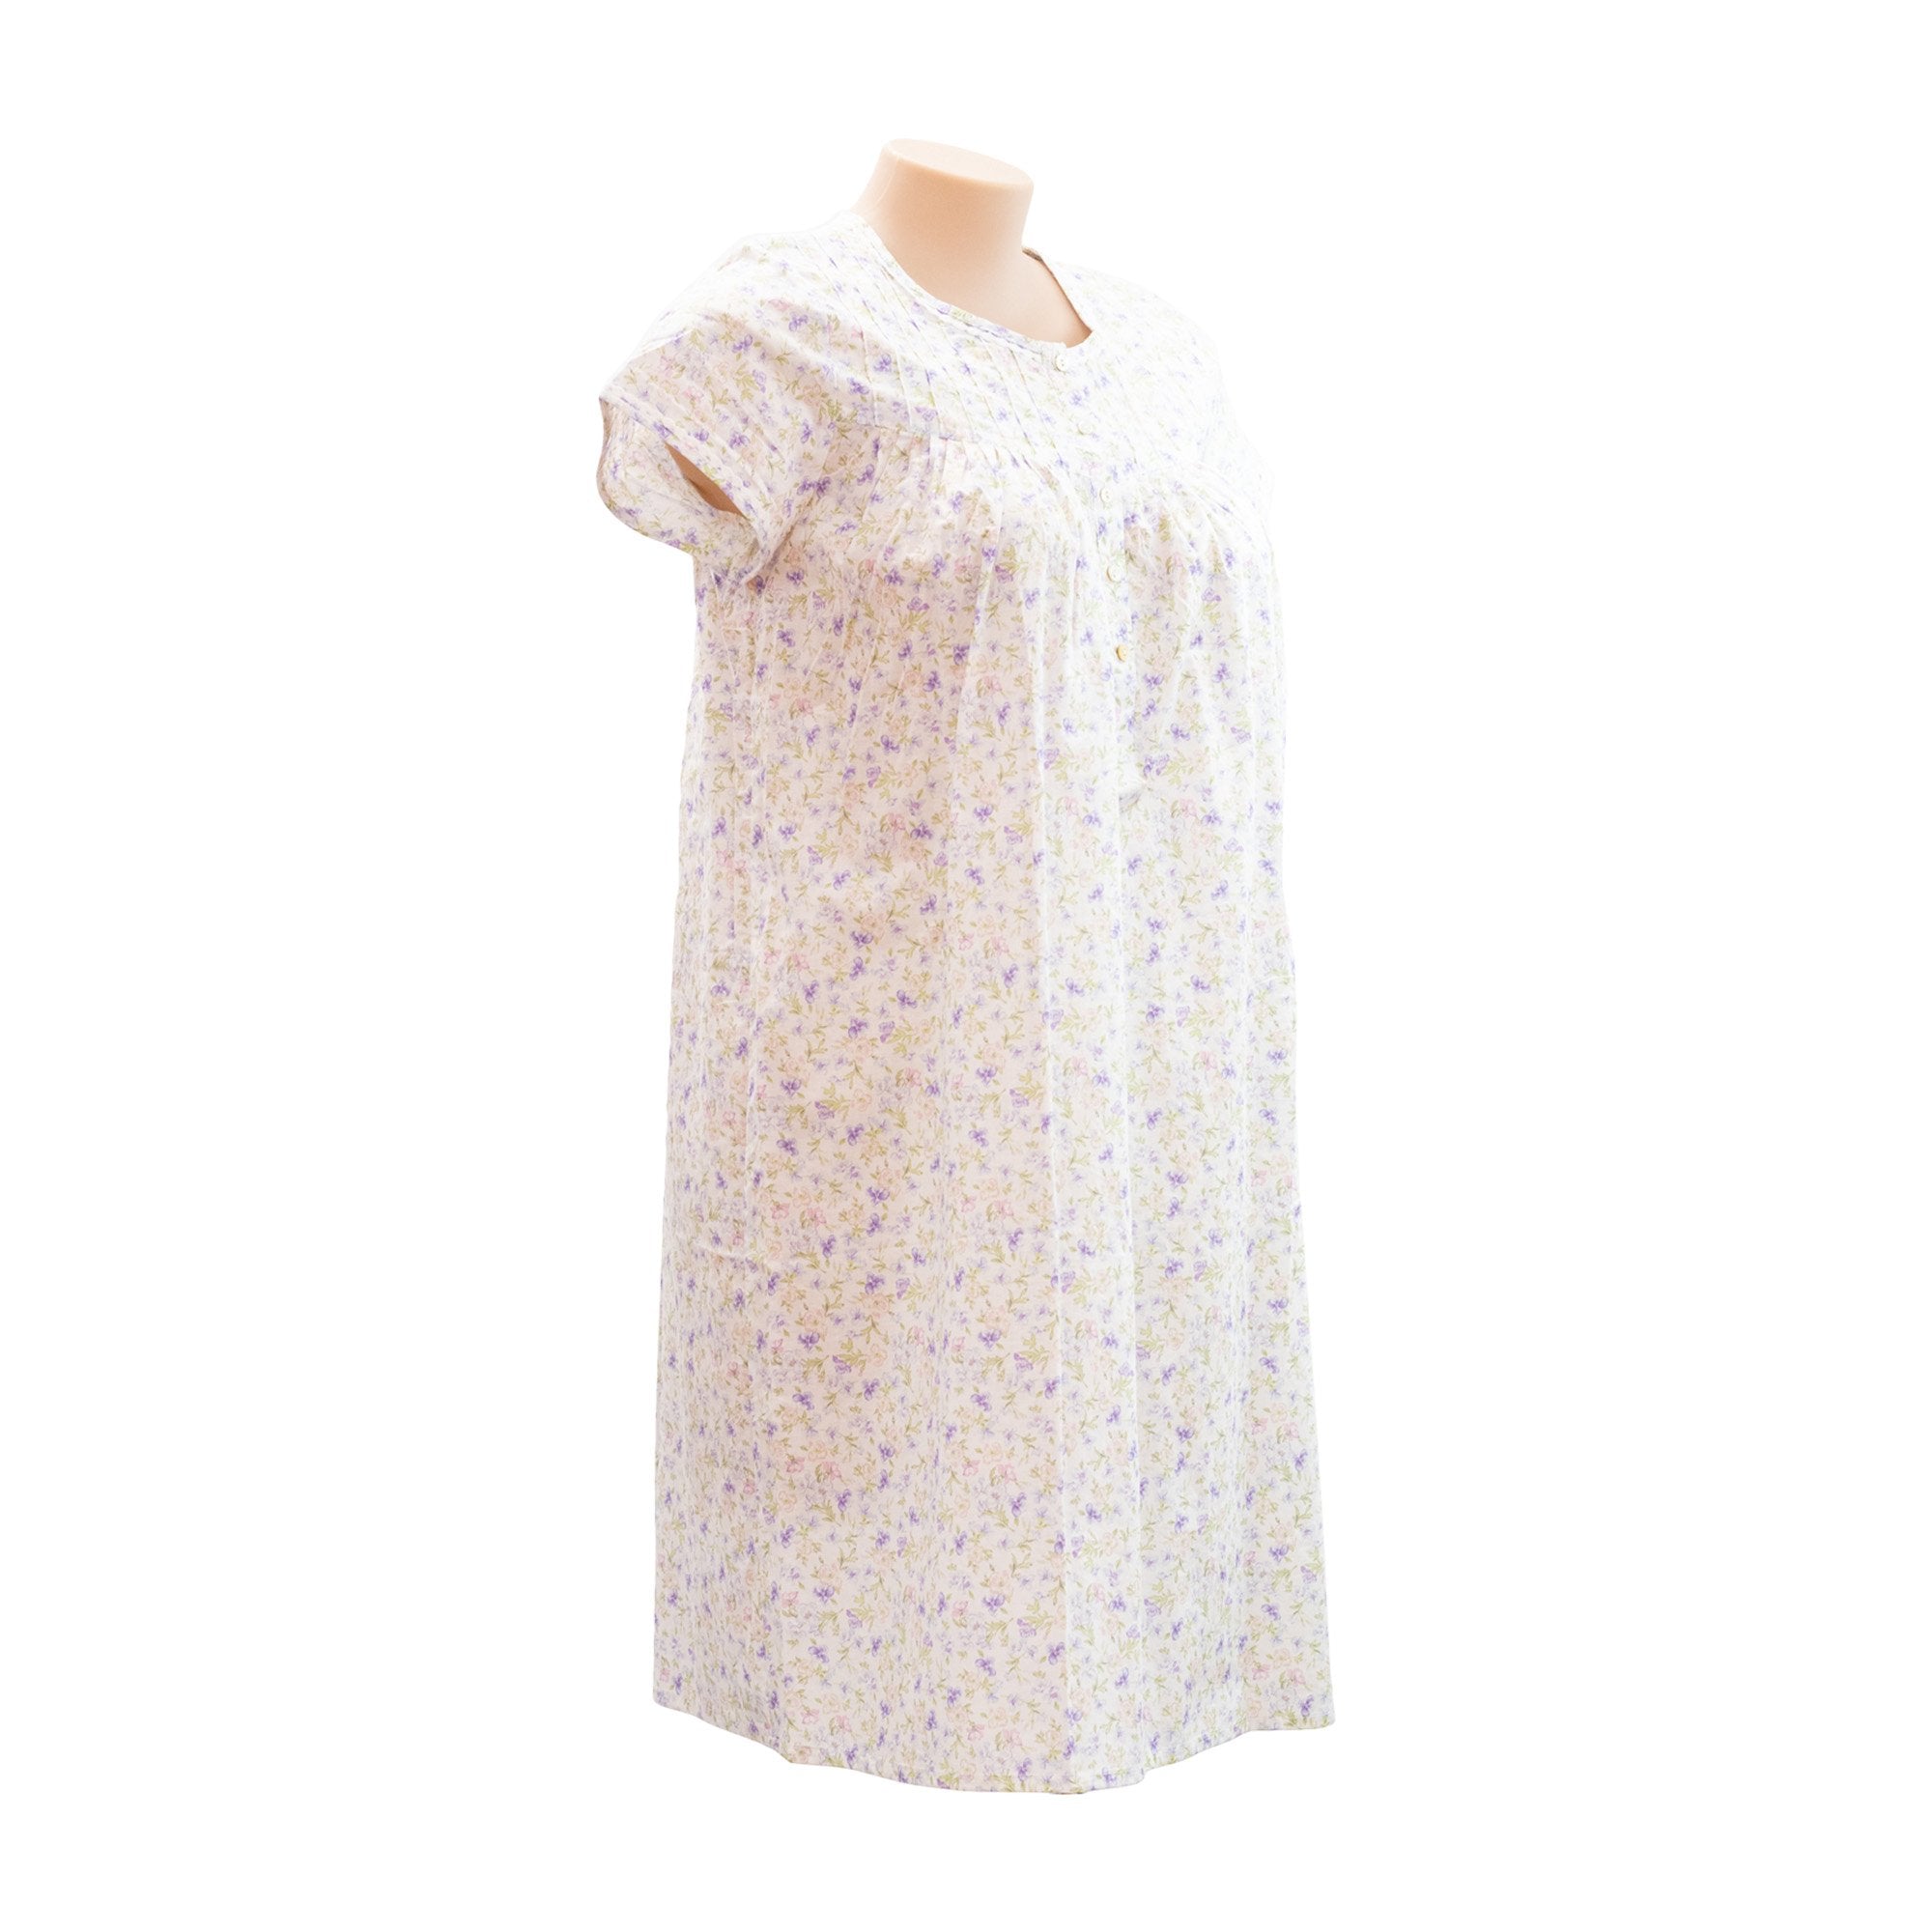 Schrank Cotton Floral Nightie - Nighties  Available at Illusions Lingerie